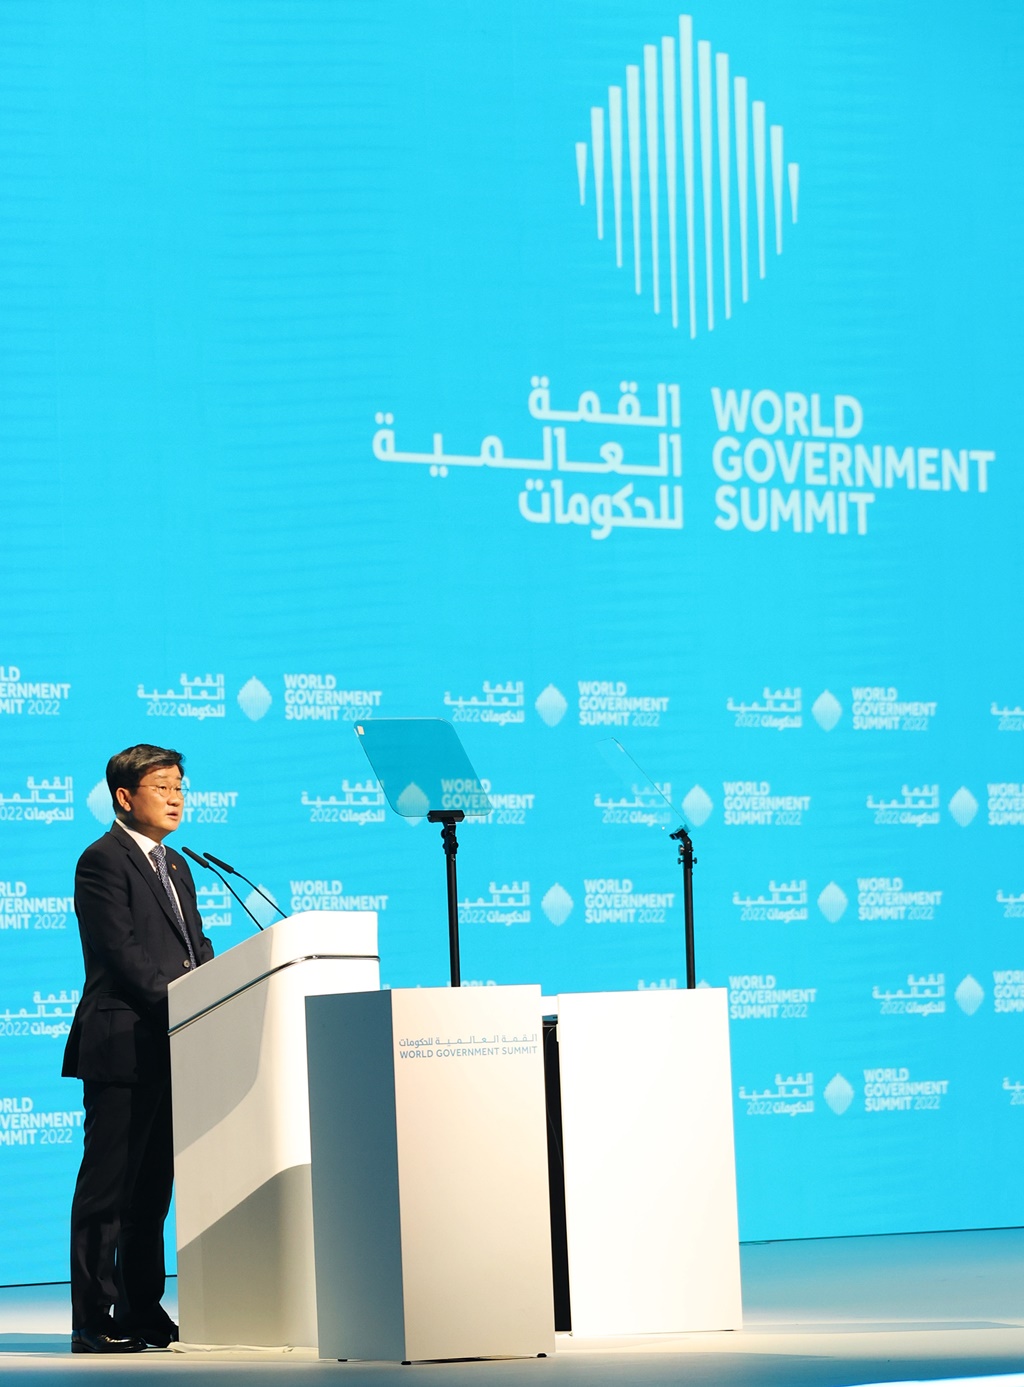 Jeon Hae-cheol, Minister of the Interior and Safety, attending the 8th World Government Summit held at the Dubai Expo Exhibition Centre in the United Arab Emirates (UAE) on the afternoon of the 30th (local time), gives a keynote speech under the theme of "The Way forward for the Future Government to Build Back Better in the post-COVID Era."